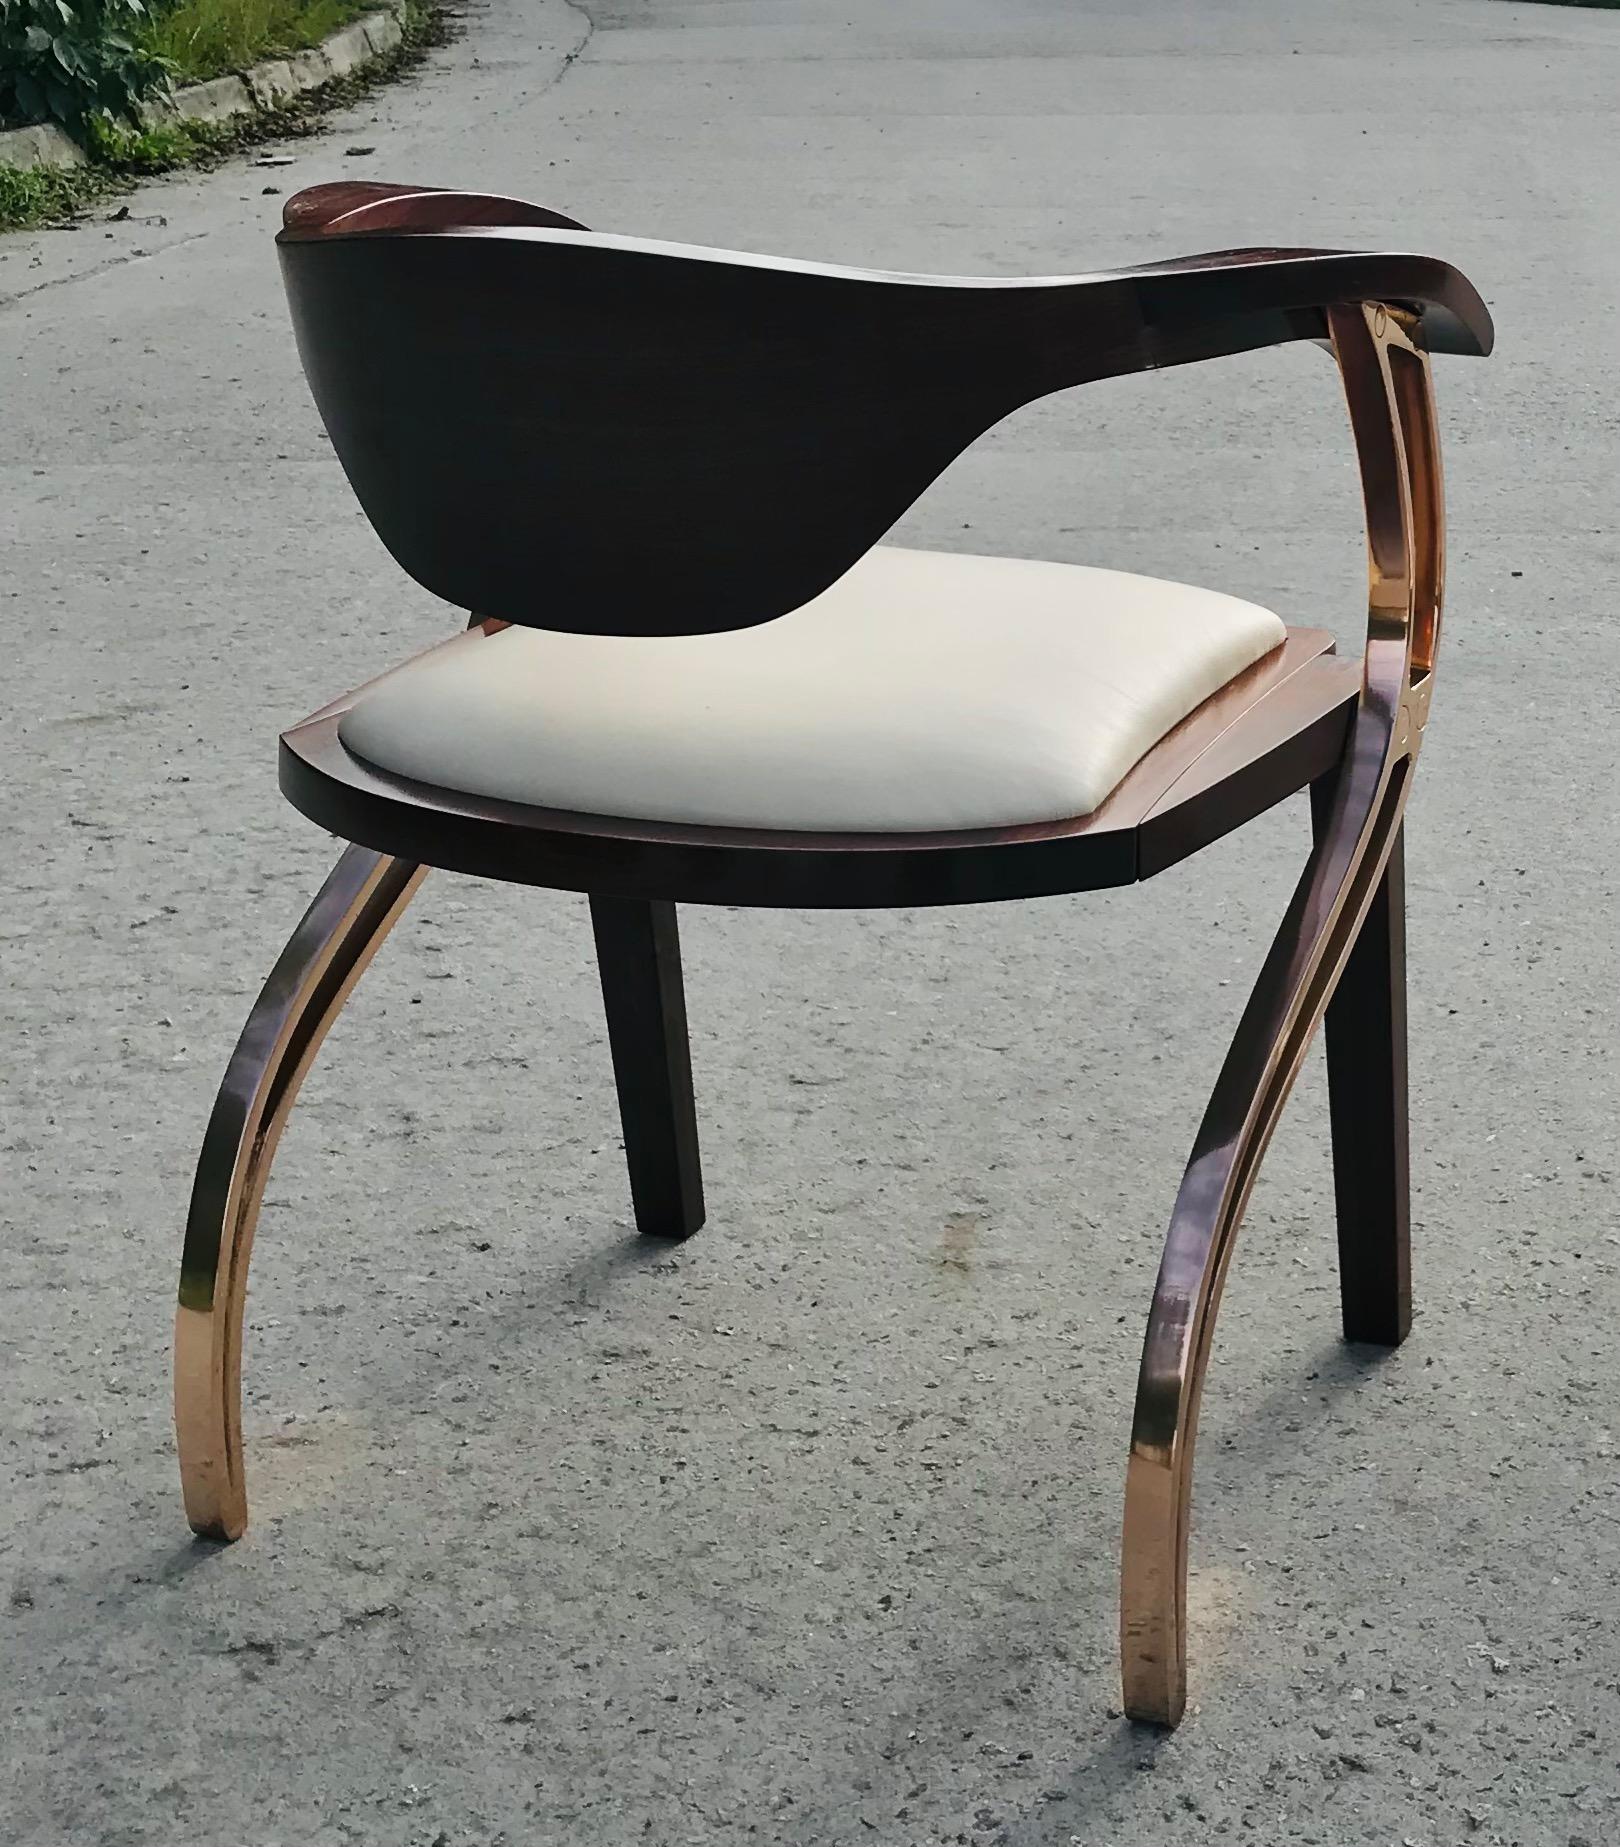 Contemporary Leather Upholstered Dark Walnut and Bronze Dining Chair In New Condition For Sale In Loddiswell, Devon